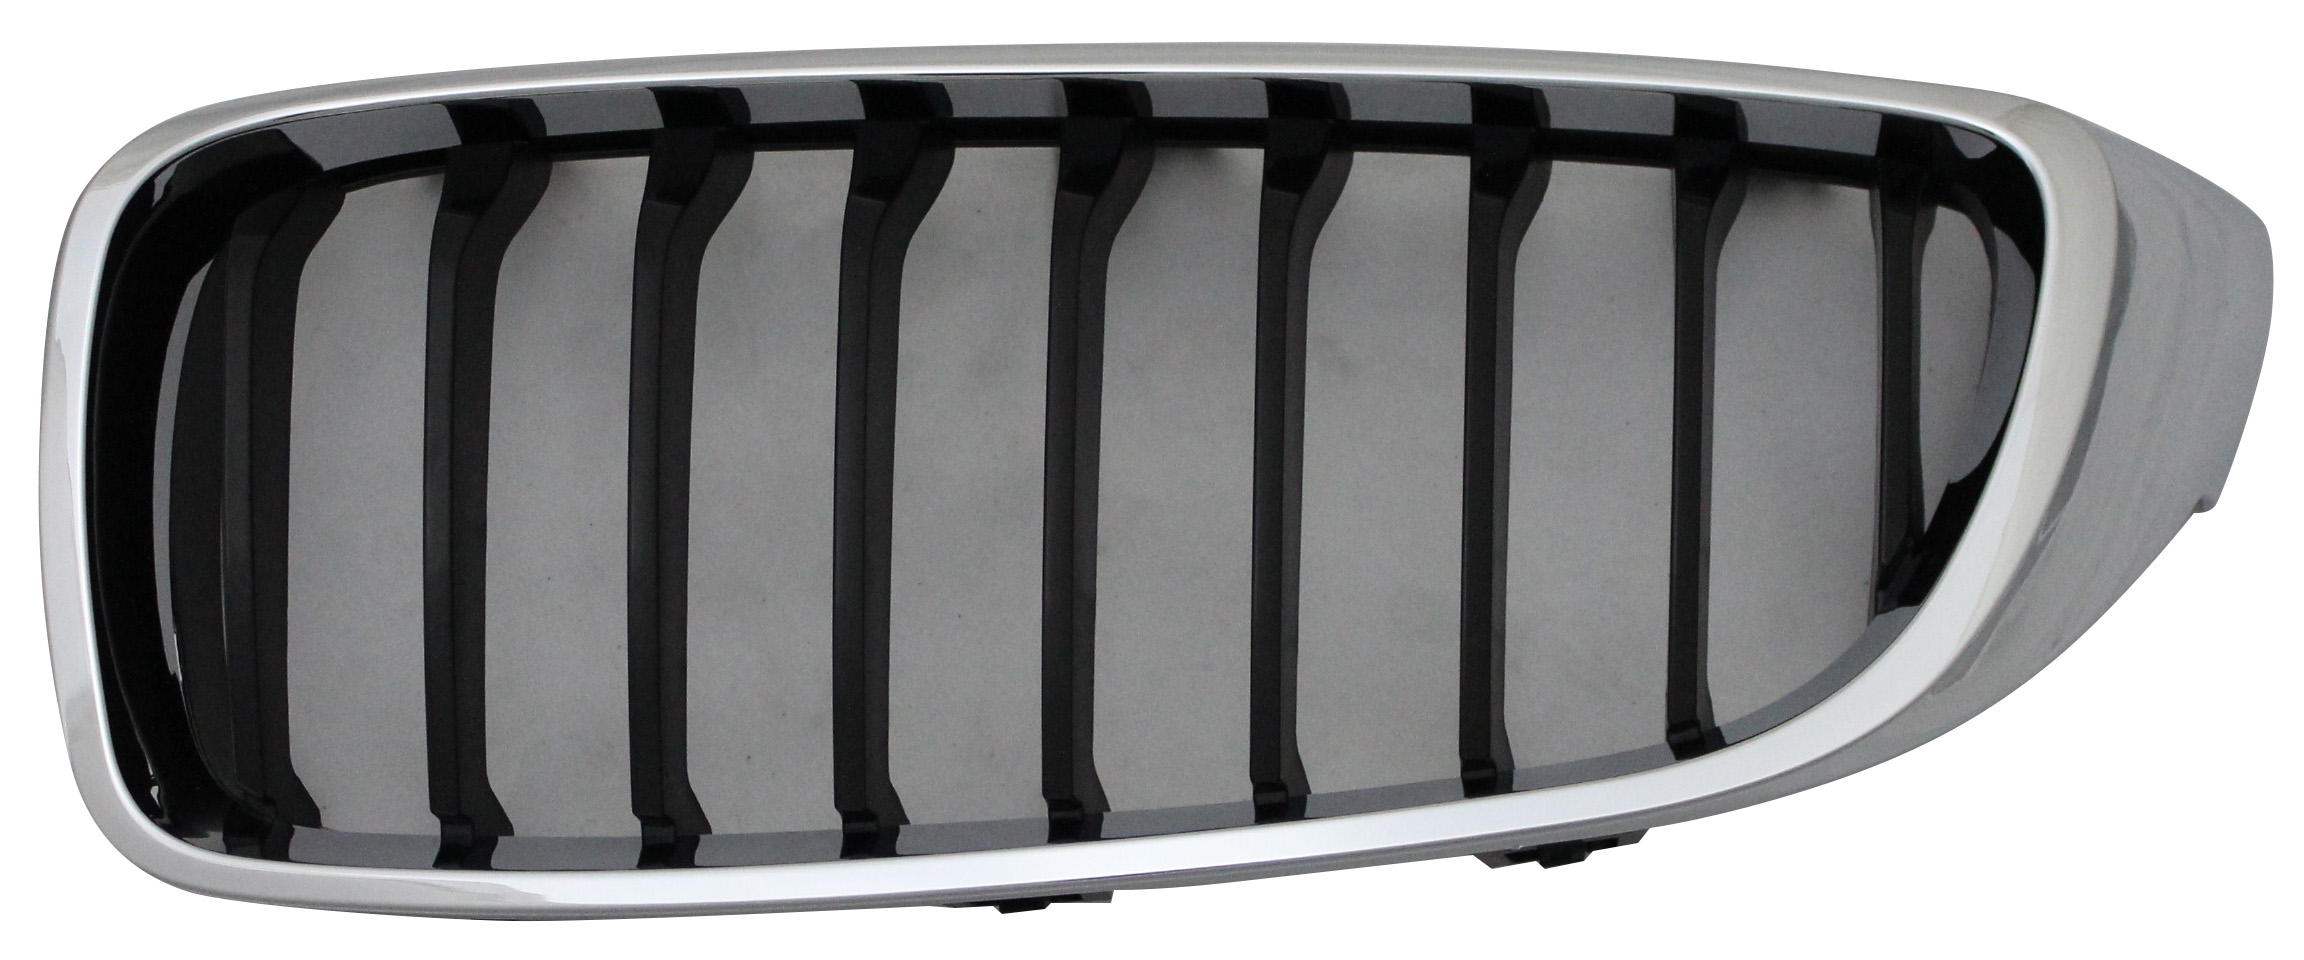 Aftermarket GRILLES for BMW - 428I GRAN COUPE, 428i Gran Coupe,15-16,Grille assy